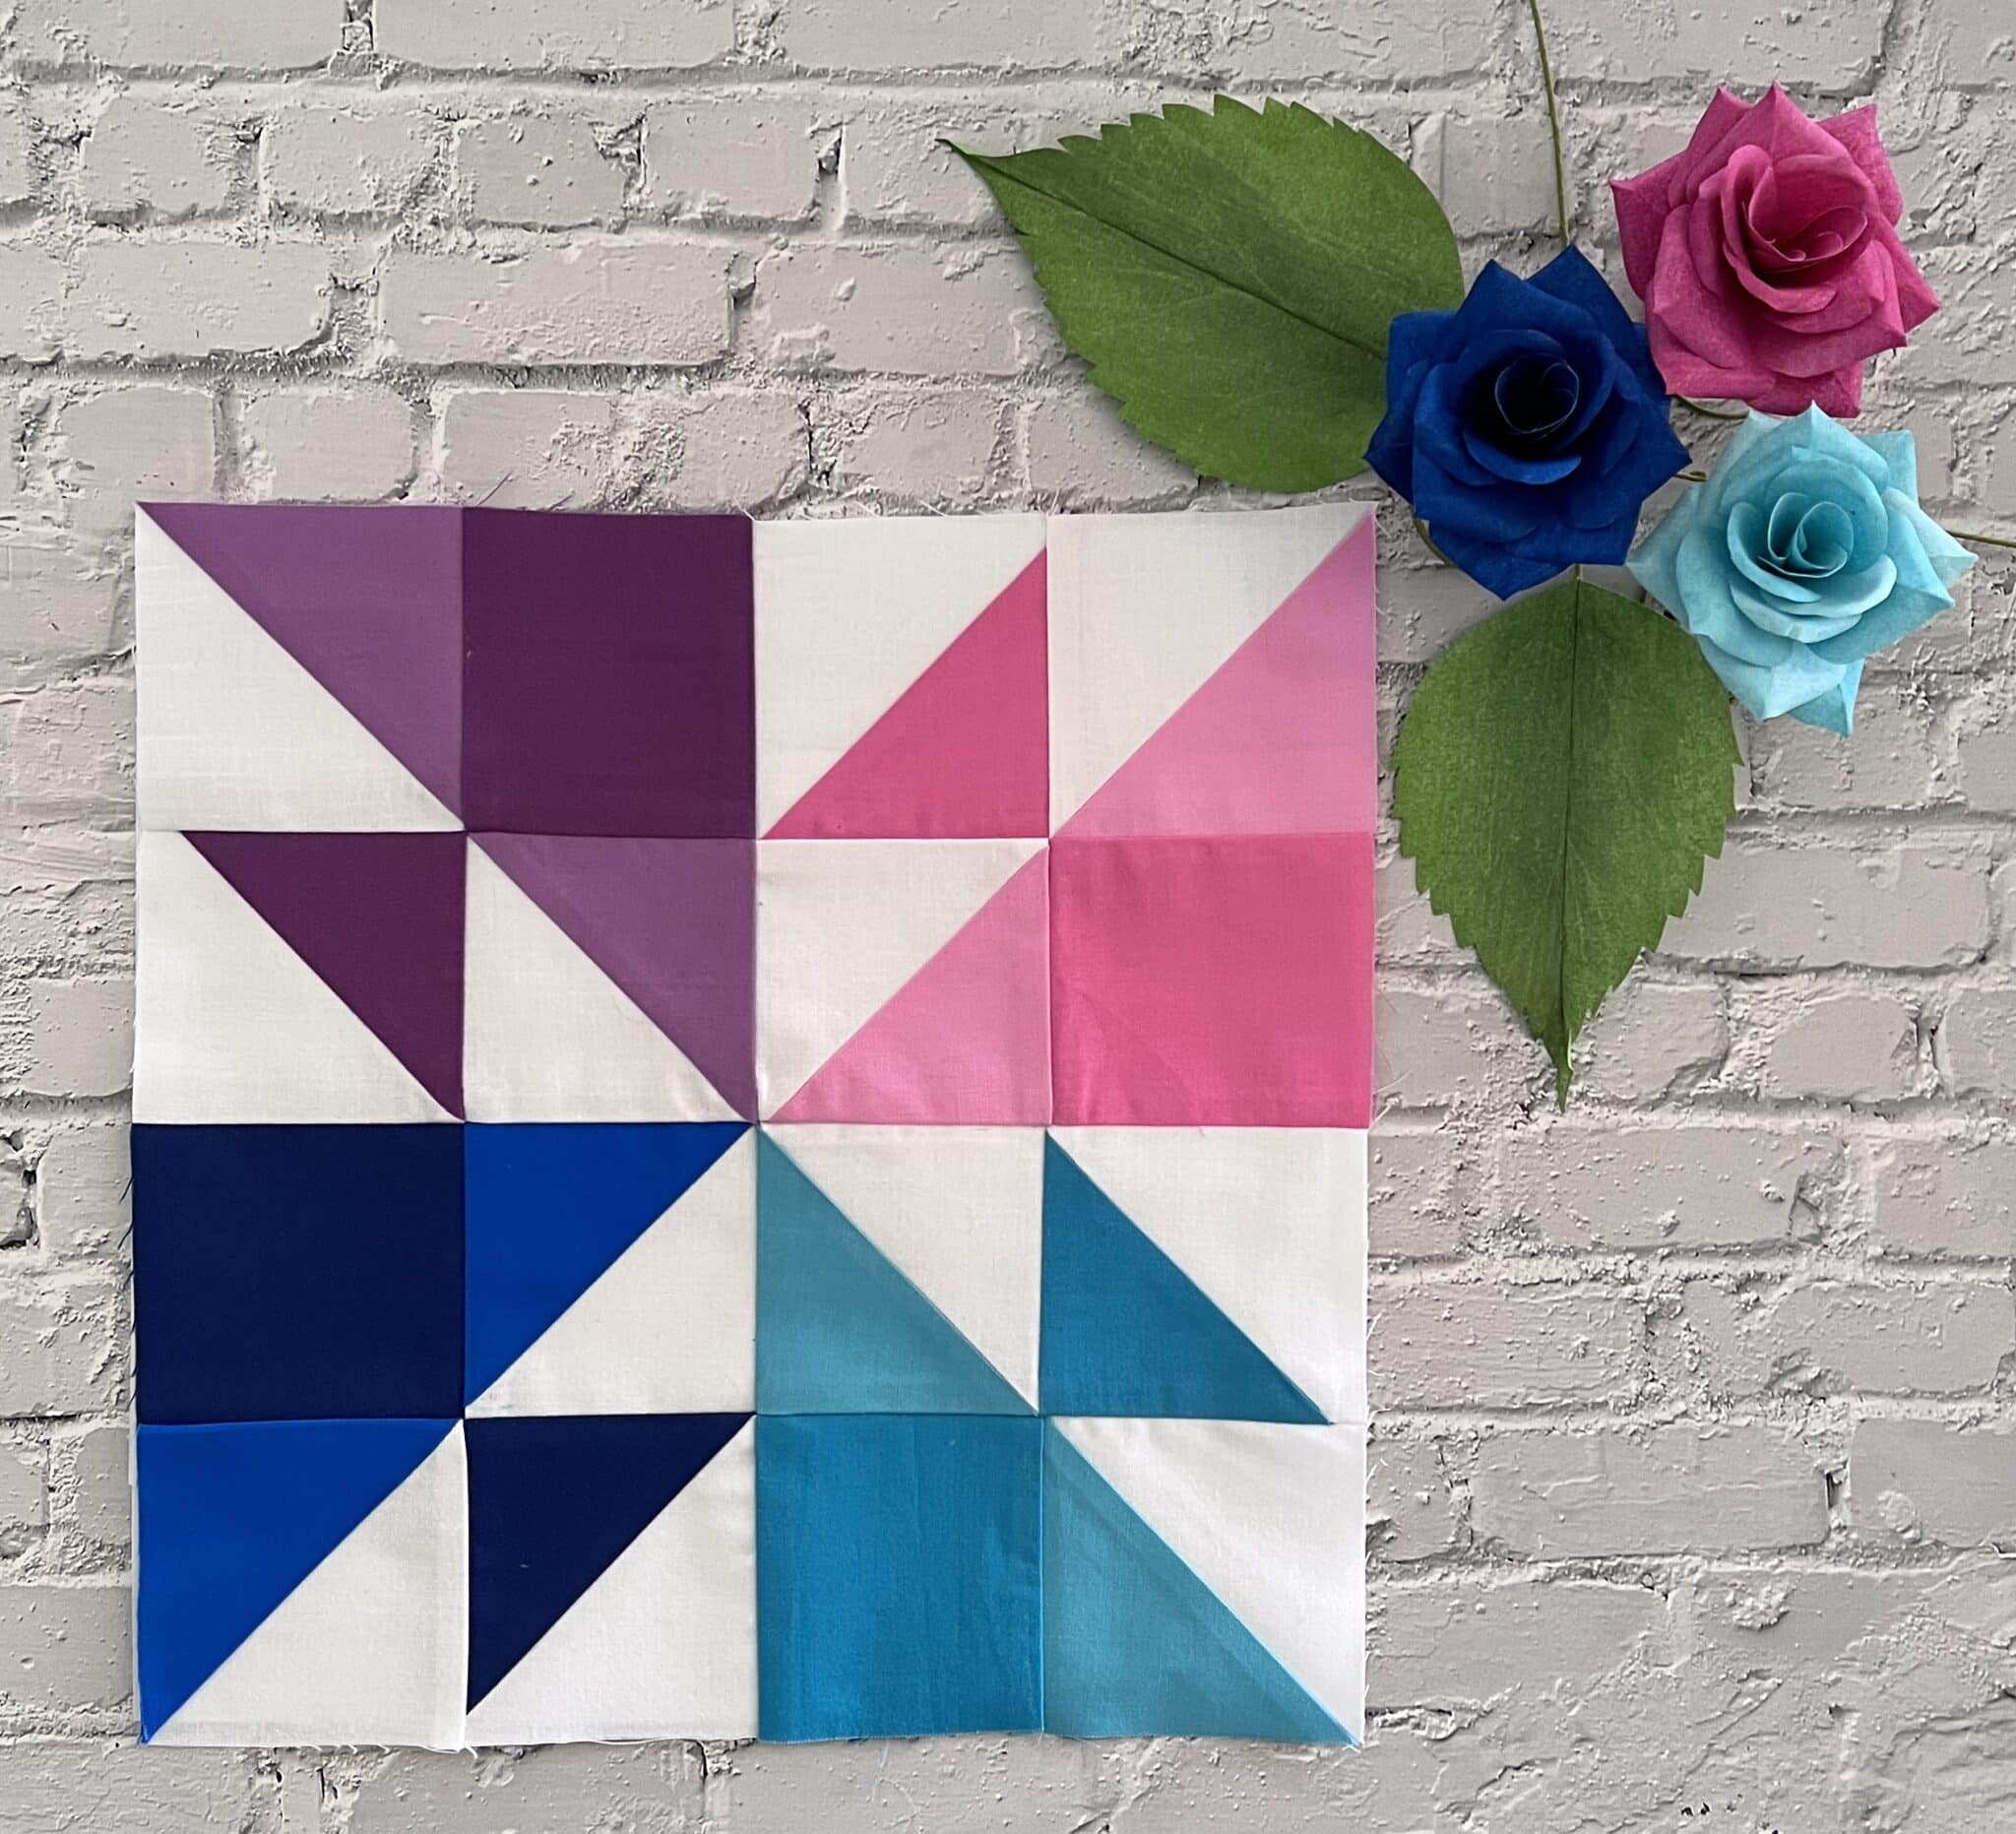 pink, blue and purple quilt block on brick table